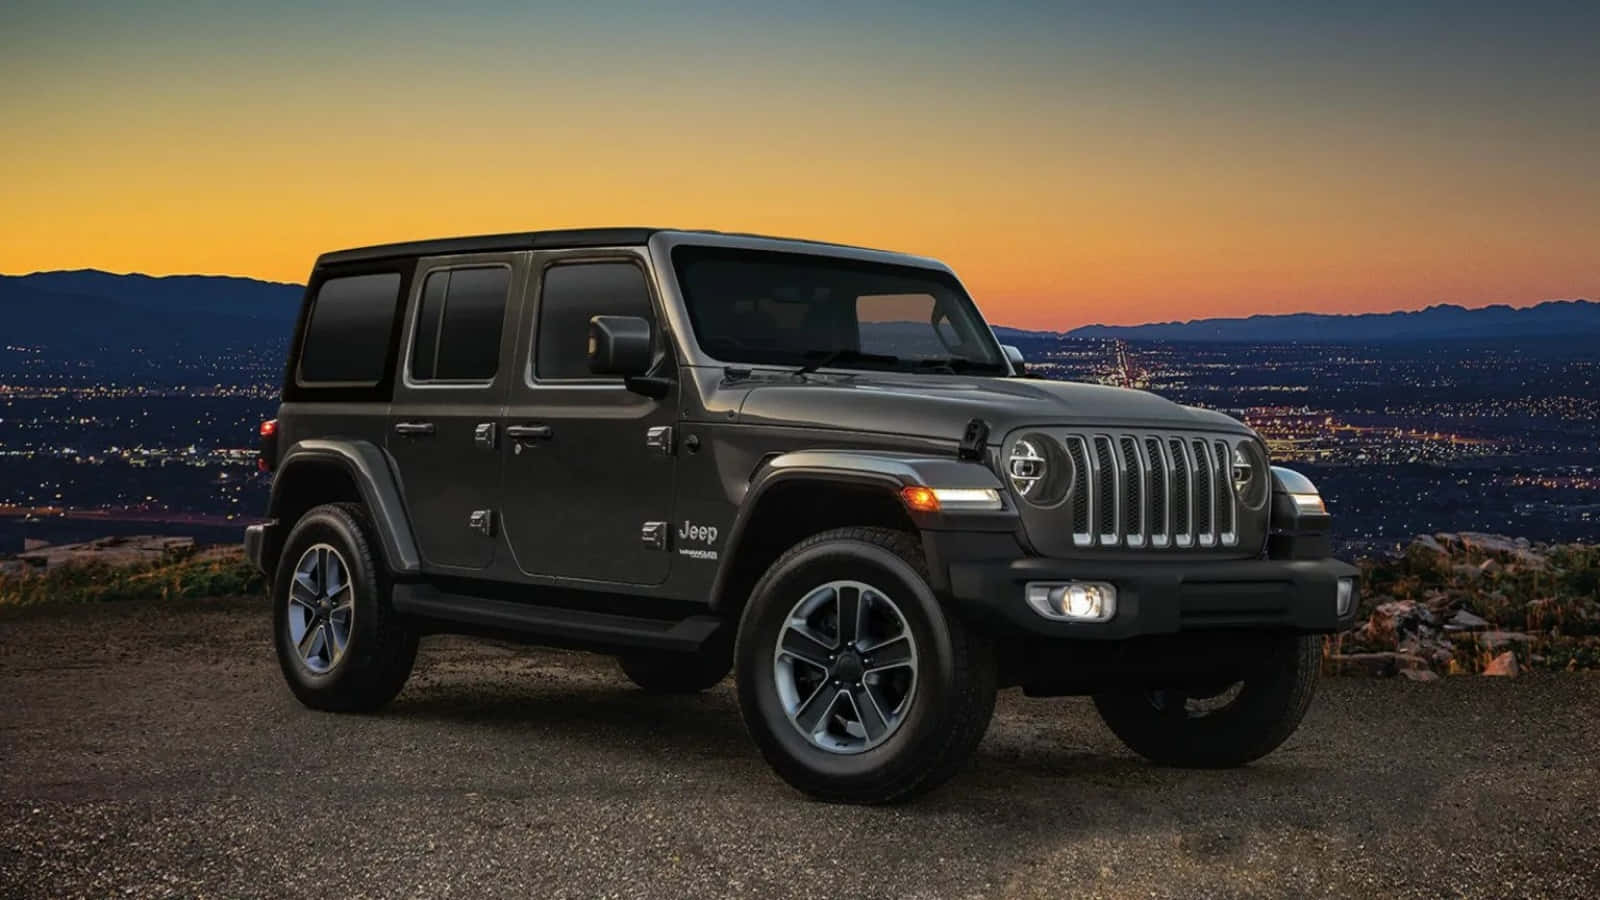 Conquer new trails with the iconic Jeep Wrangler!